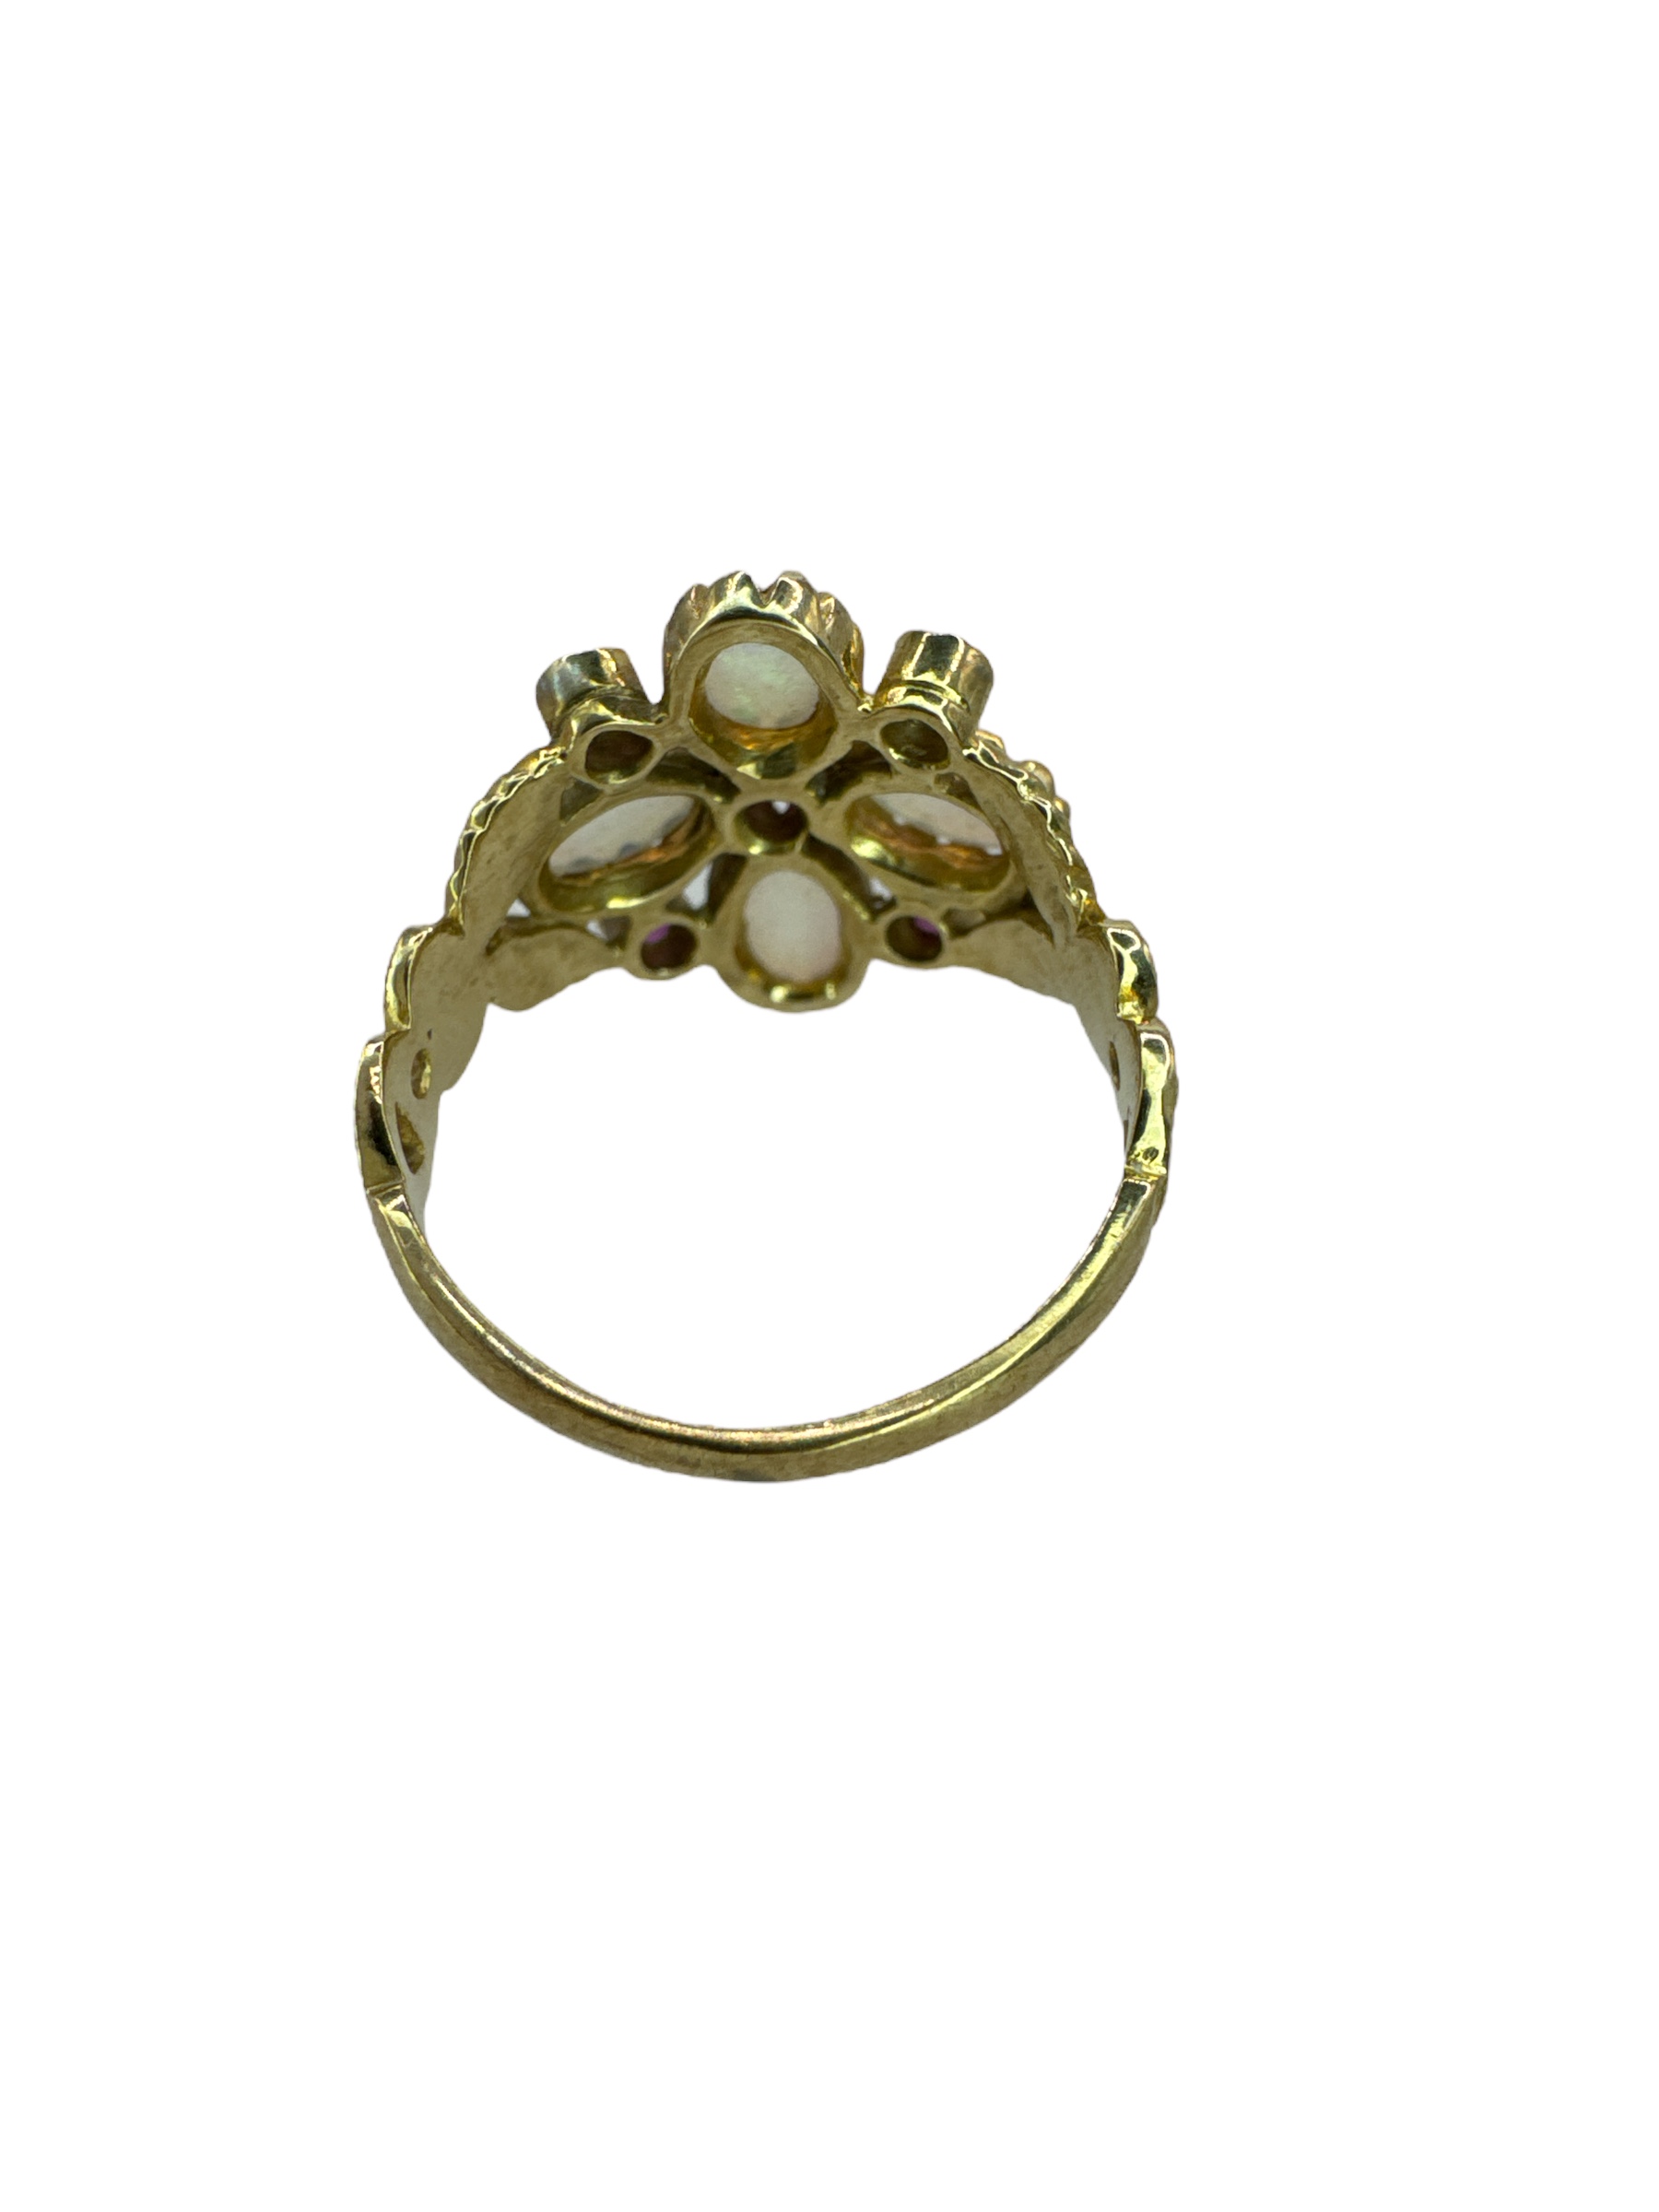 An opal and ruby set quatrefoil ring in 9ct yellow gold, with gold scroll work. Size N. Gross weight - Image 3 of 3